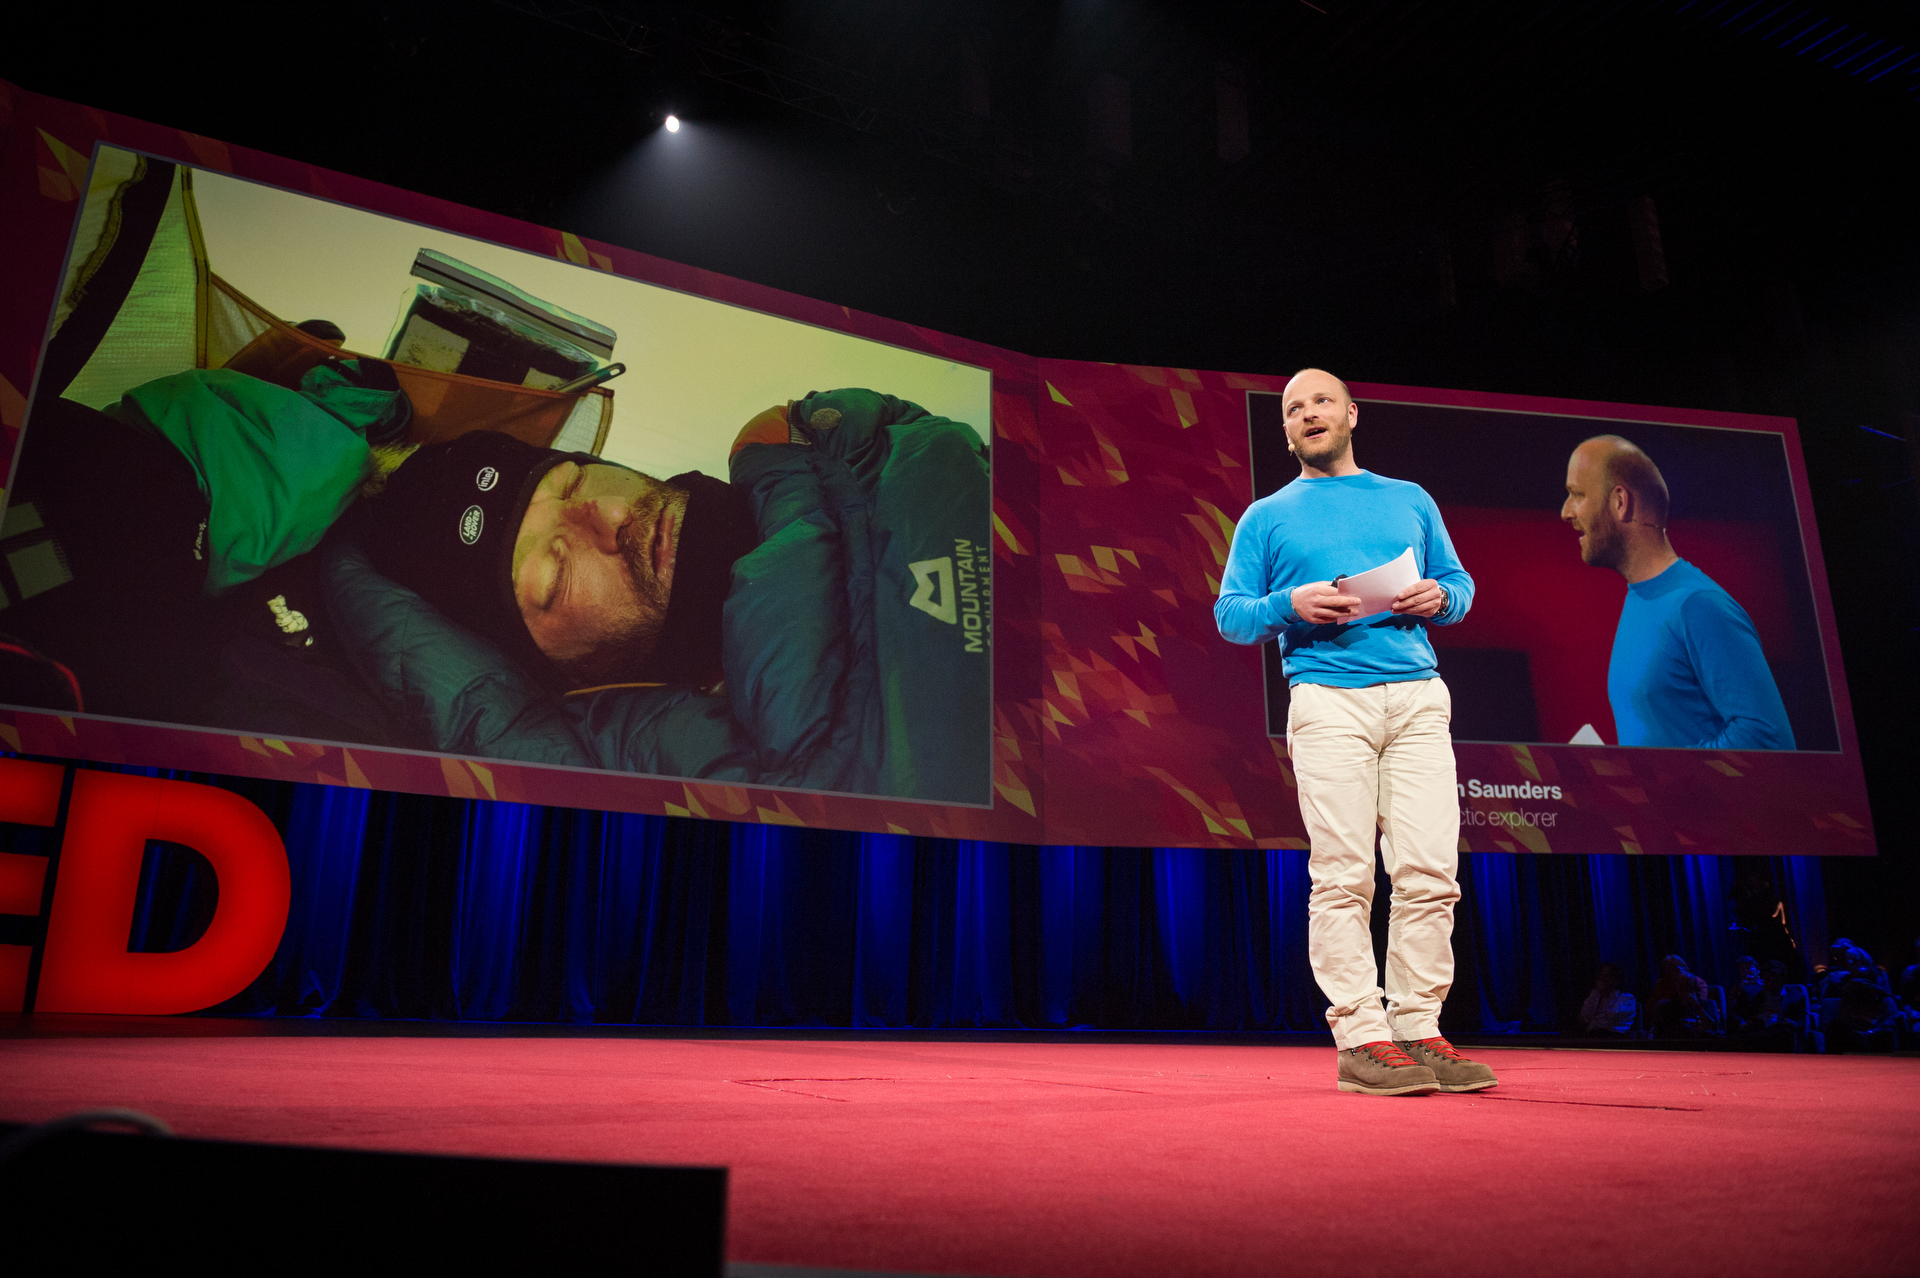 The hardest 105 days of my life: Ben Saunders at TED2014